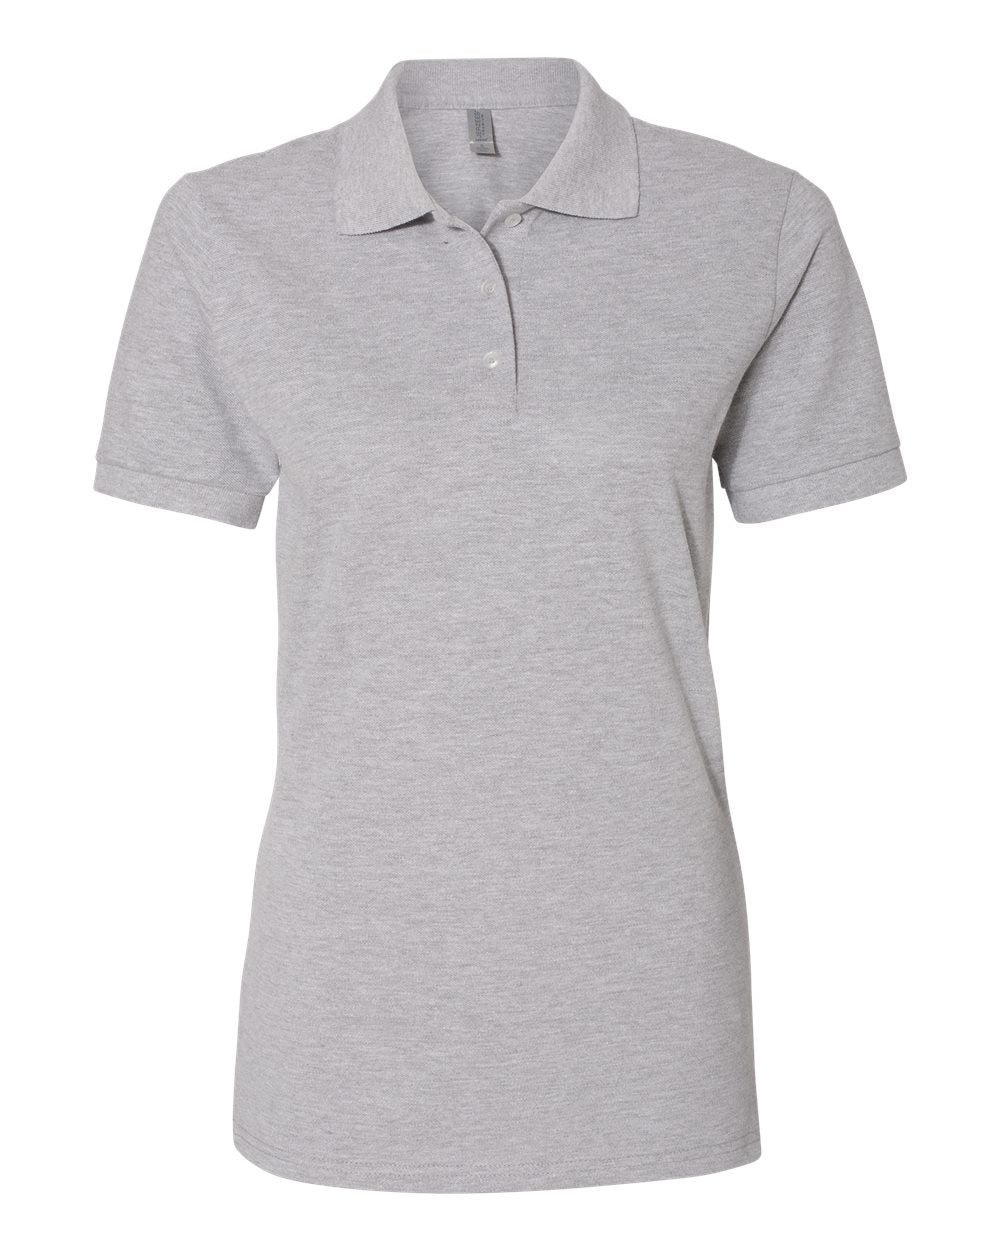 womans jerzees ringspun cotton polo athletic heather